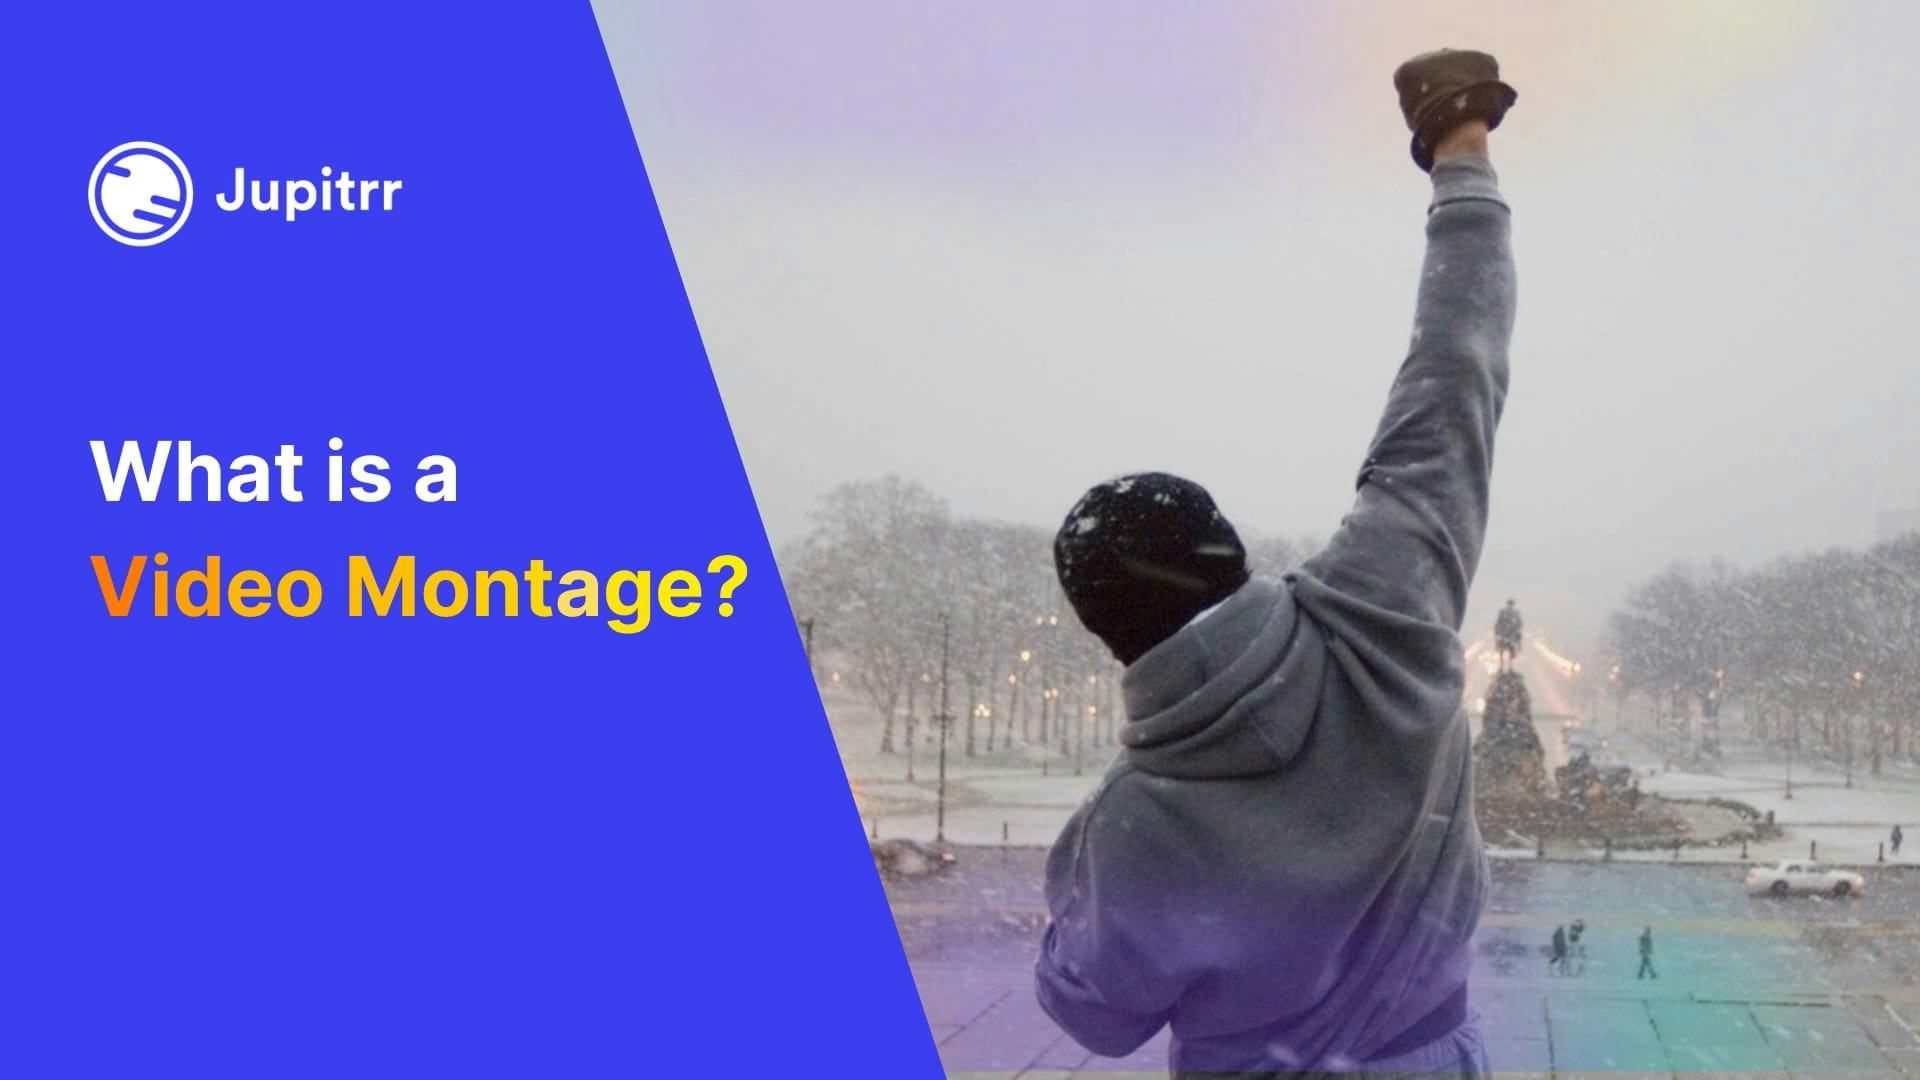 What is a Video Montage?